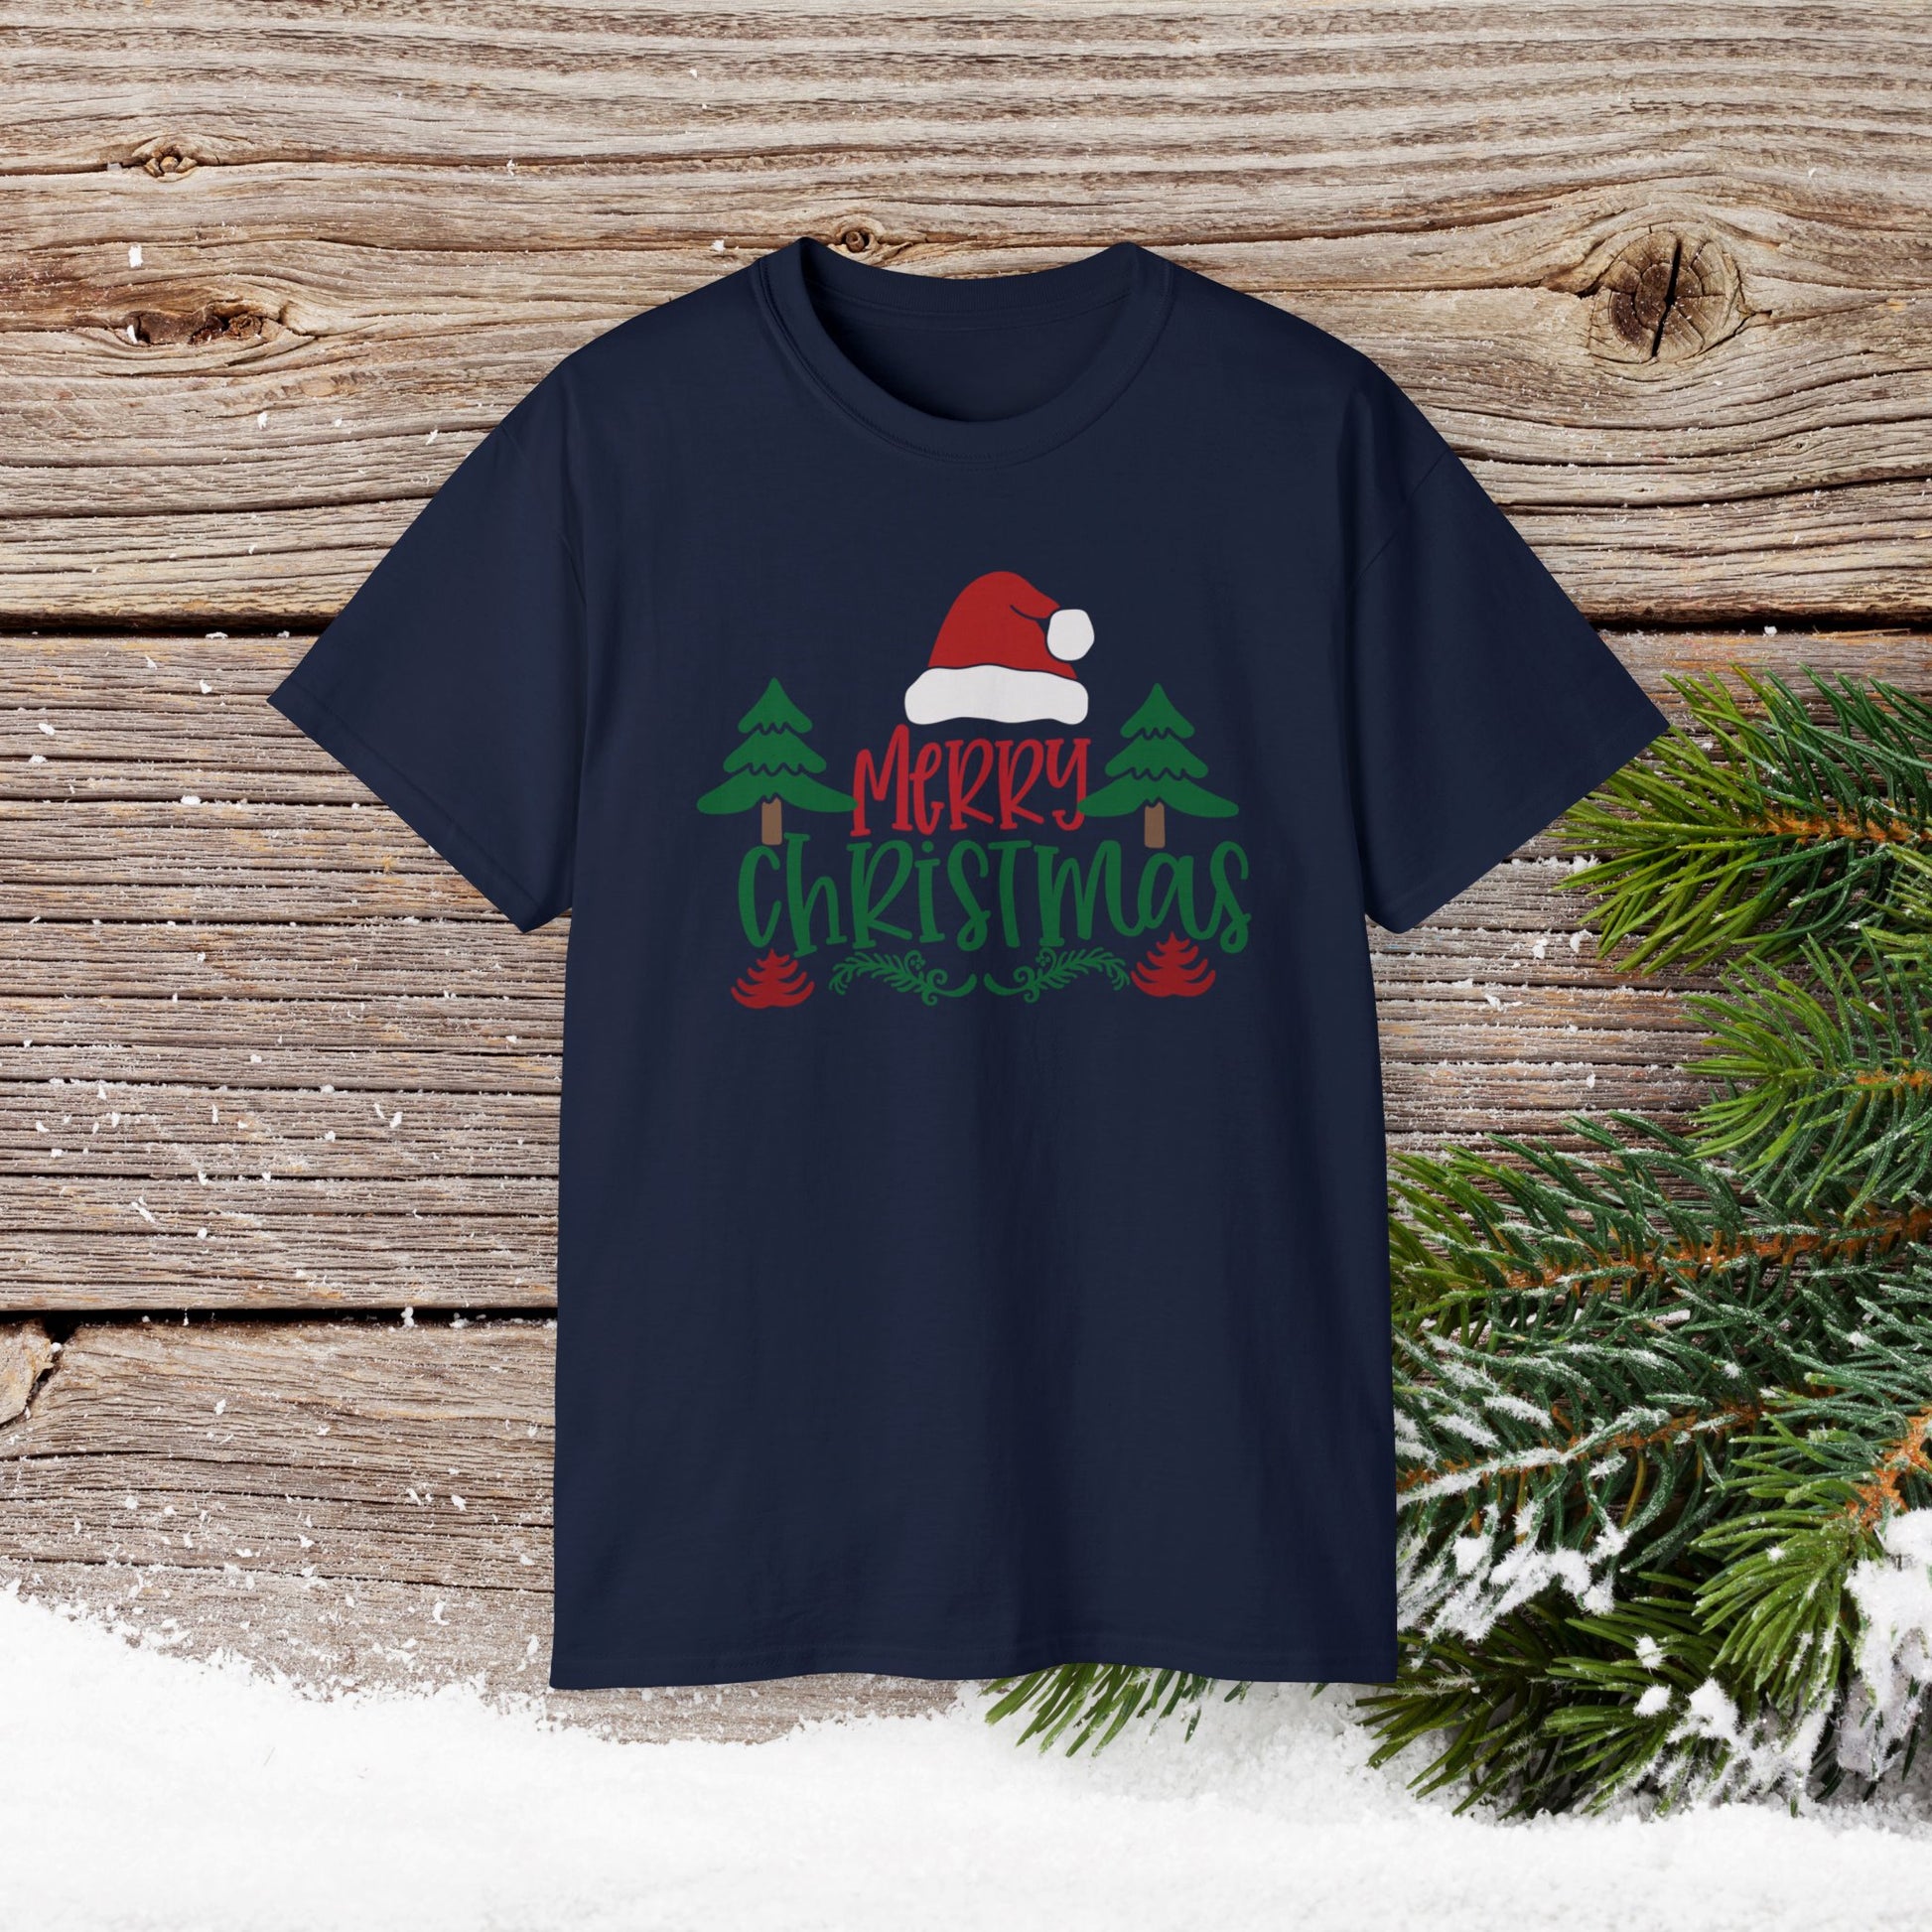 Christmas T-Shirt - Merry Christmas - Cute Christmas Shirts - Youth and Adult Christmas TShirts T-Shirts Graphic Avenue Navy Adult Small 